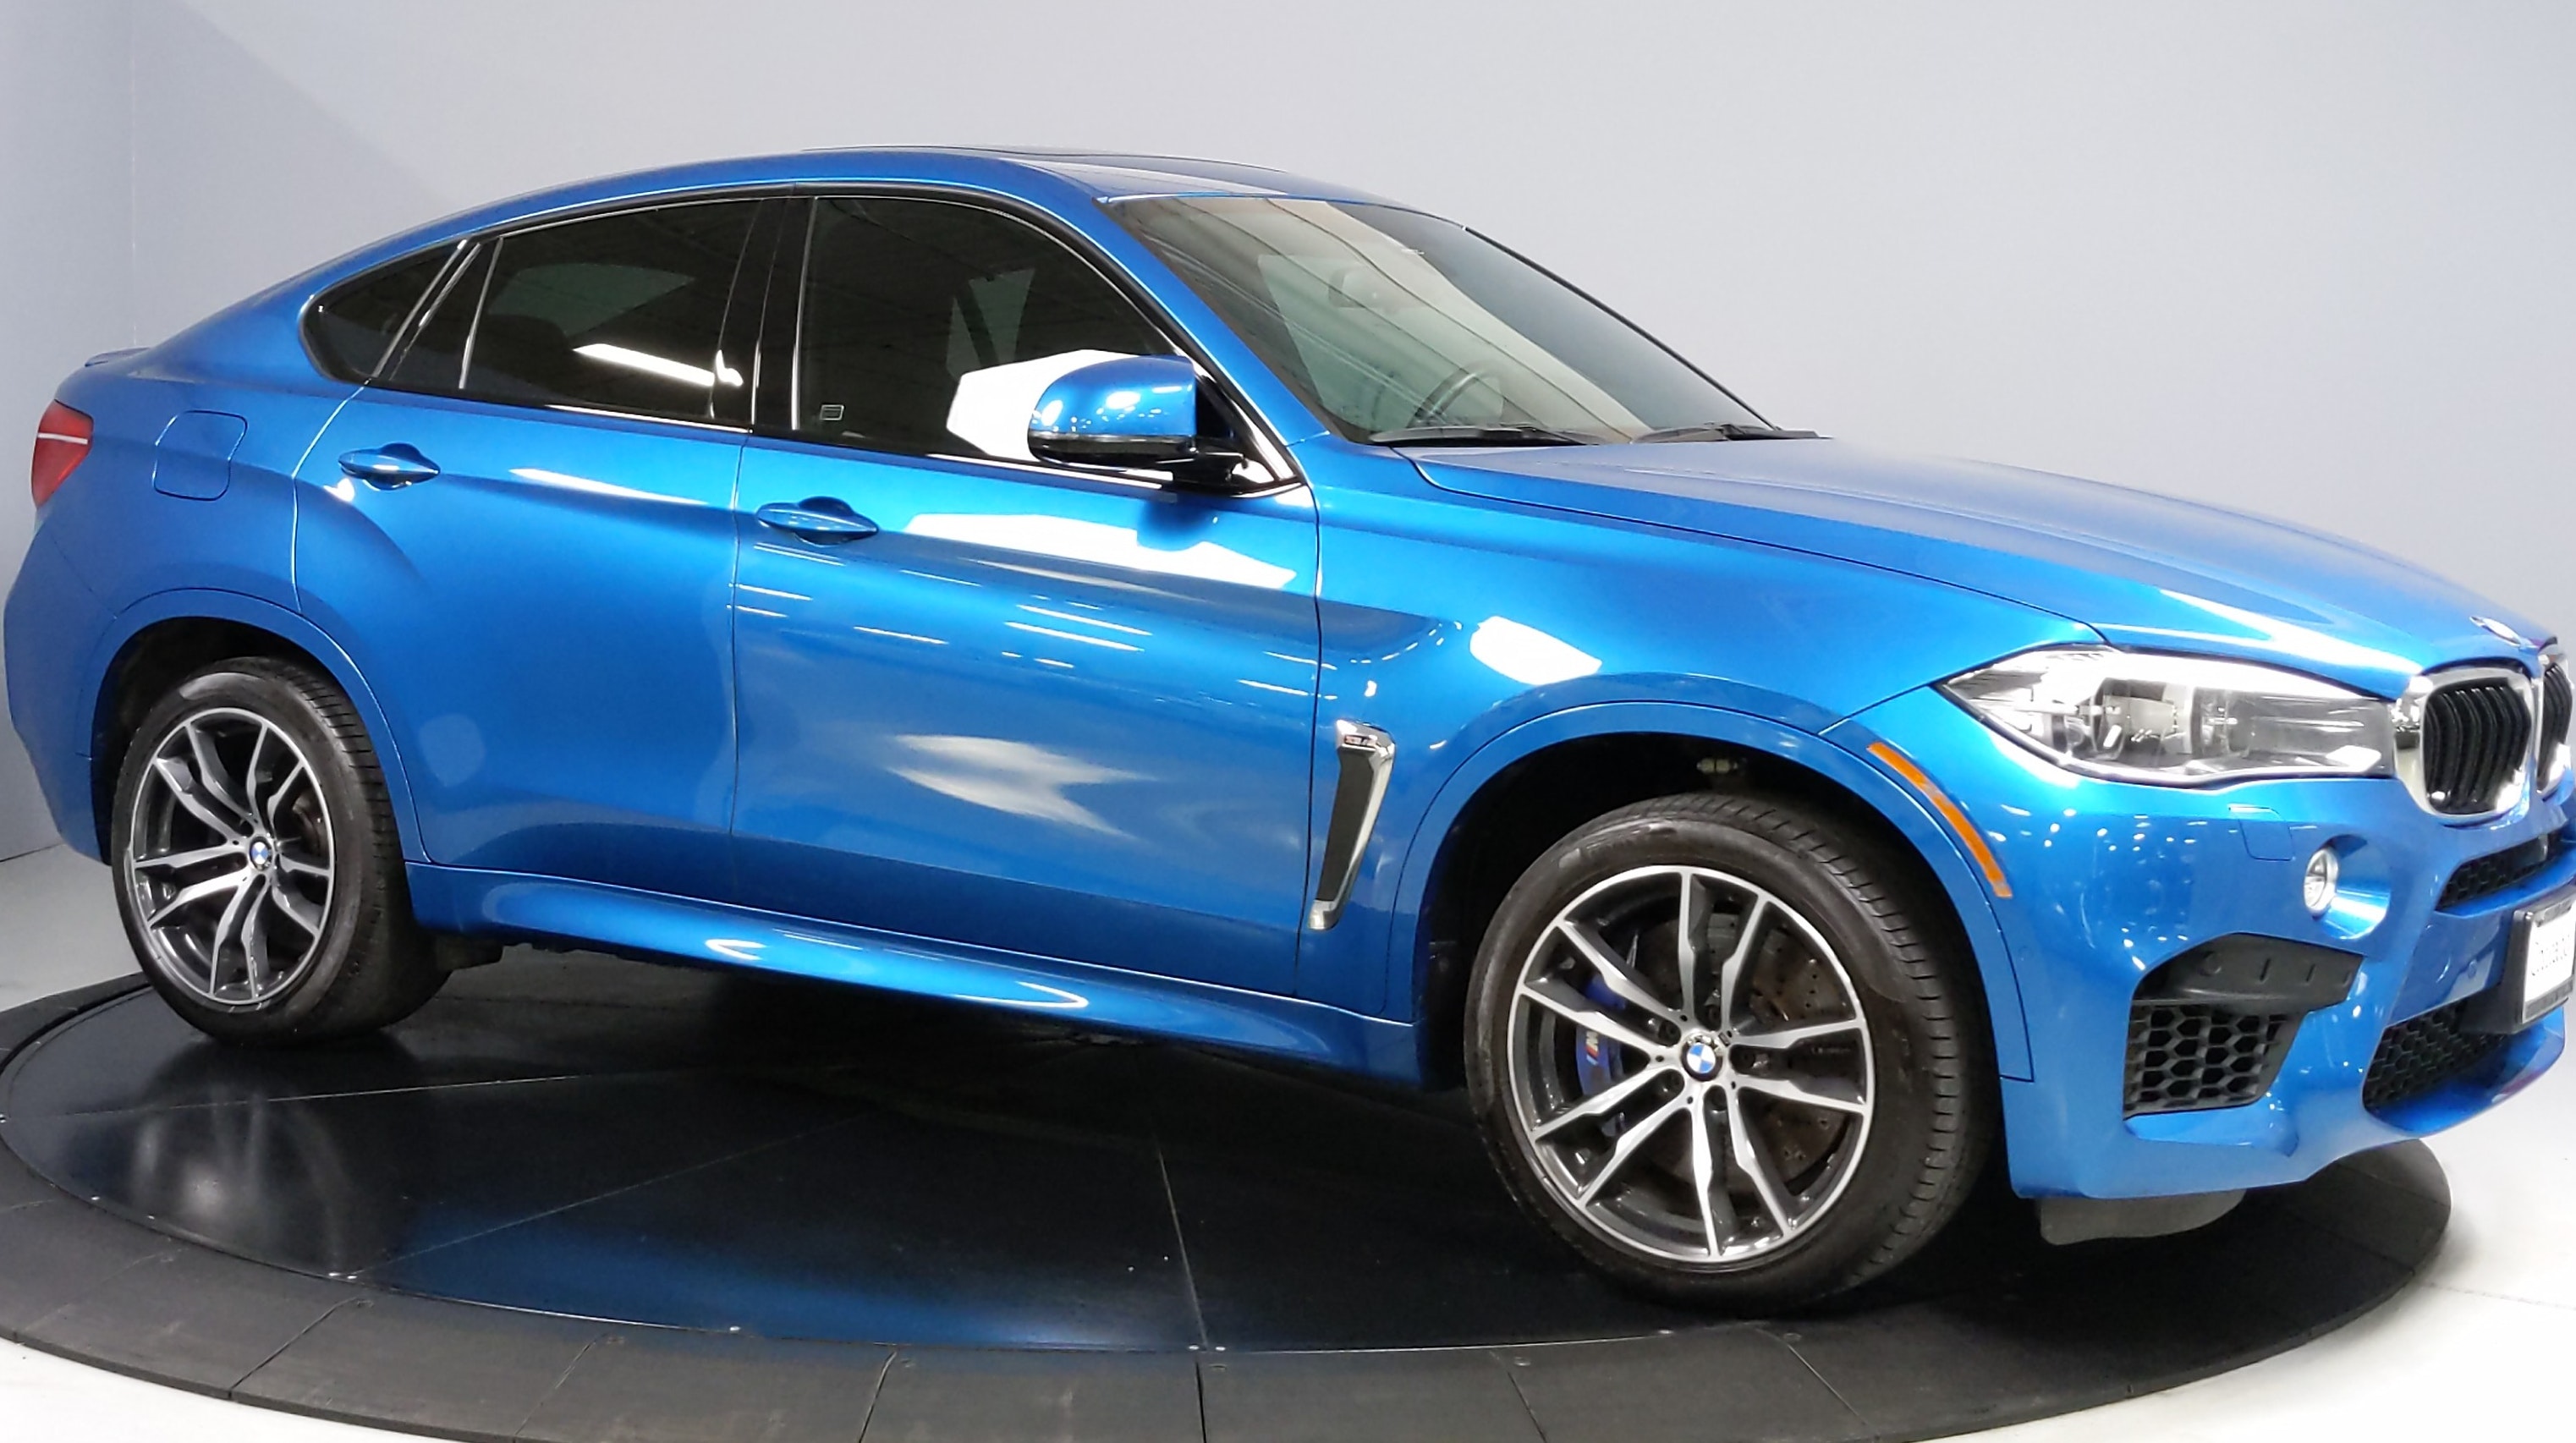 Vehicle details - 2017 BMW X6 M at Greater Chicago Motors Glendale Heights  - WWW.Greater Chicago Motors